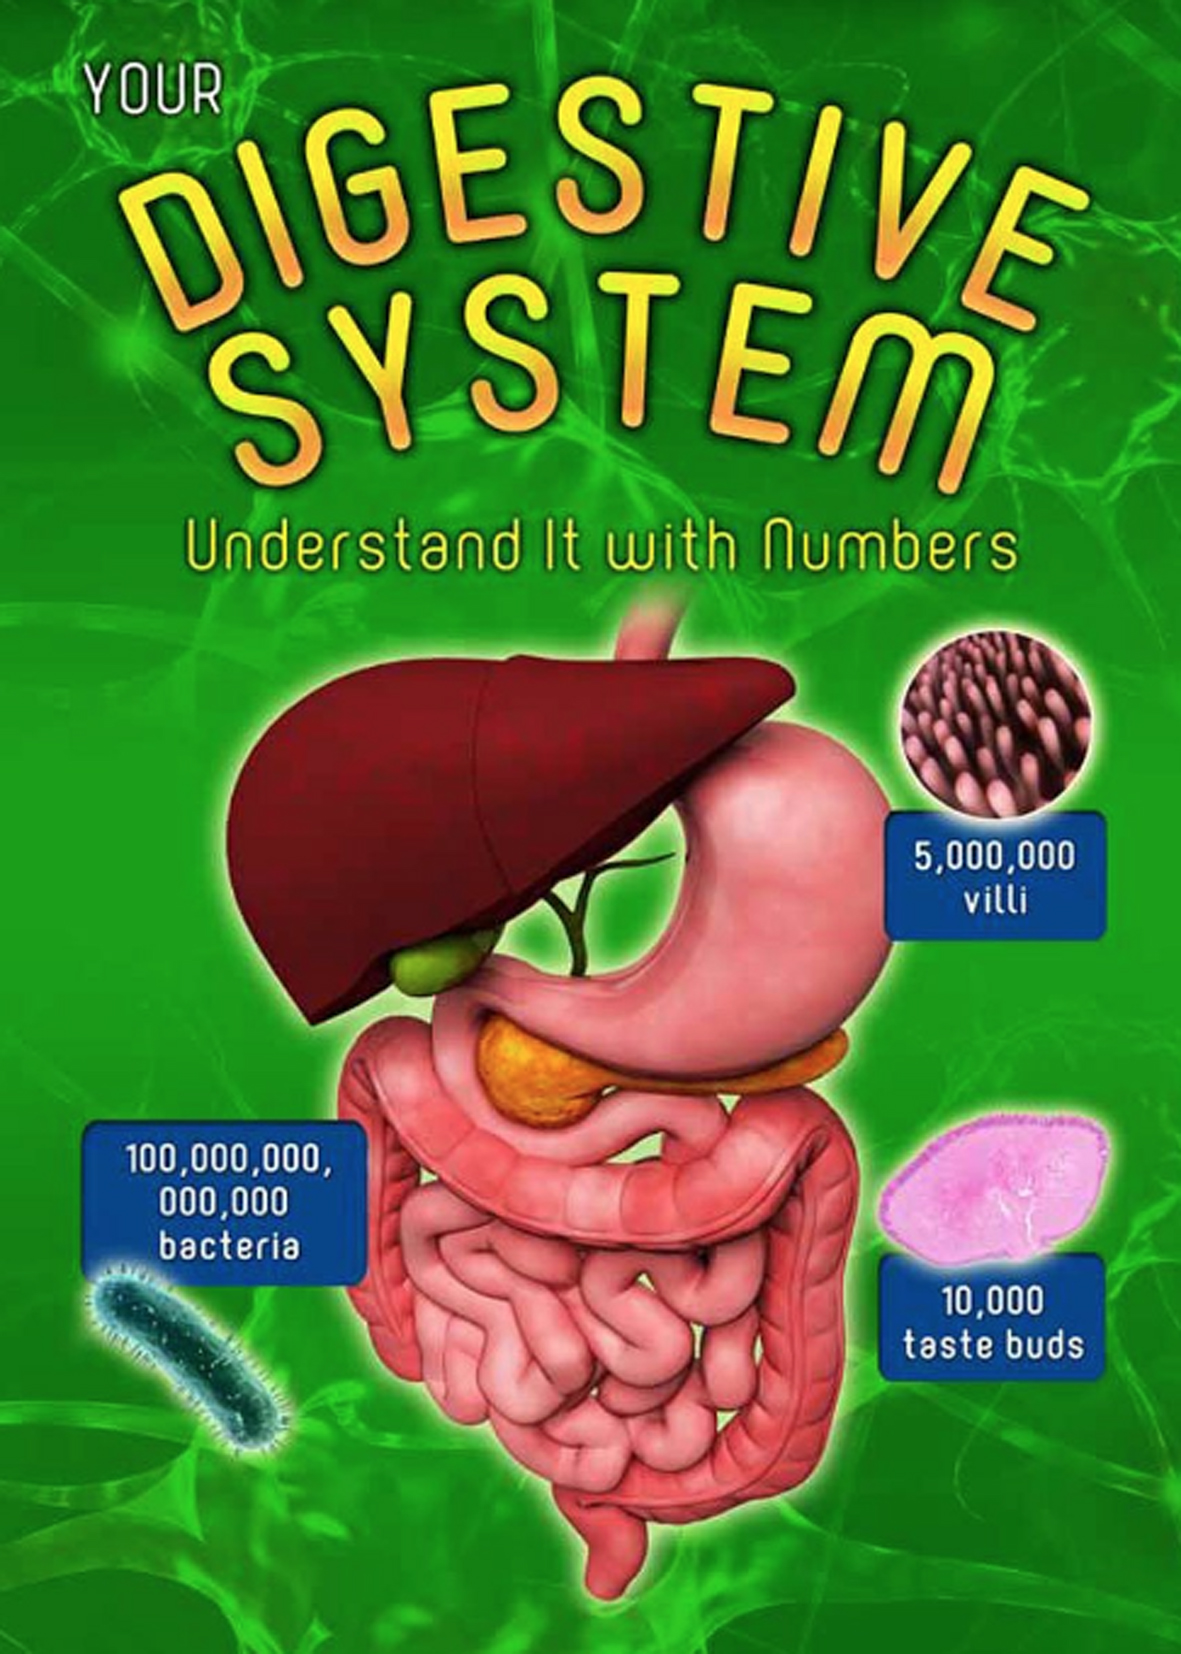 YOUR DIGESTIVE SYSTEM (Understand them with numbers) by DK Today